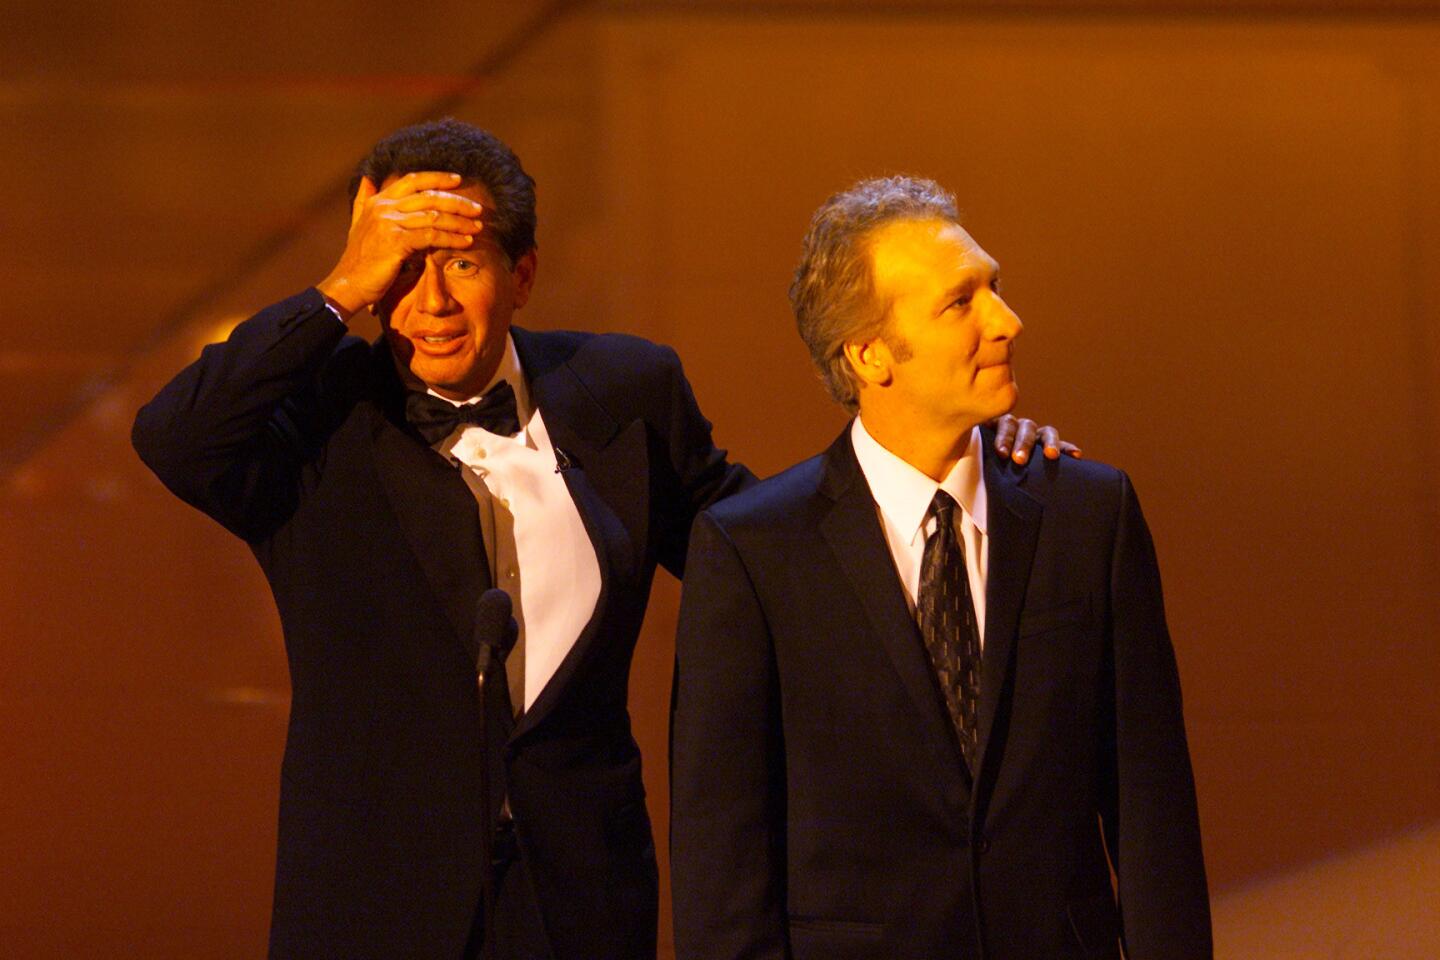 Garry Shandling: Life in pictures